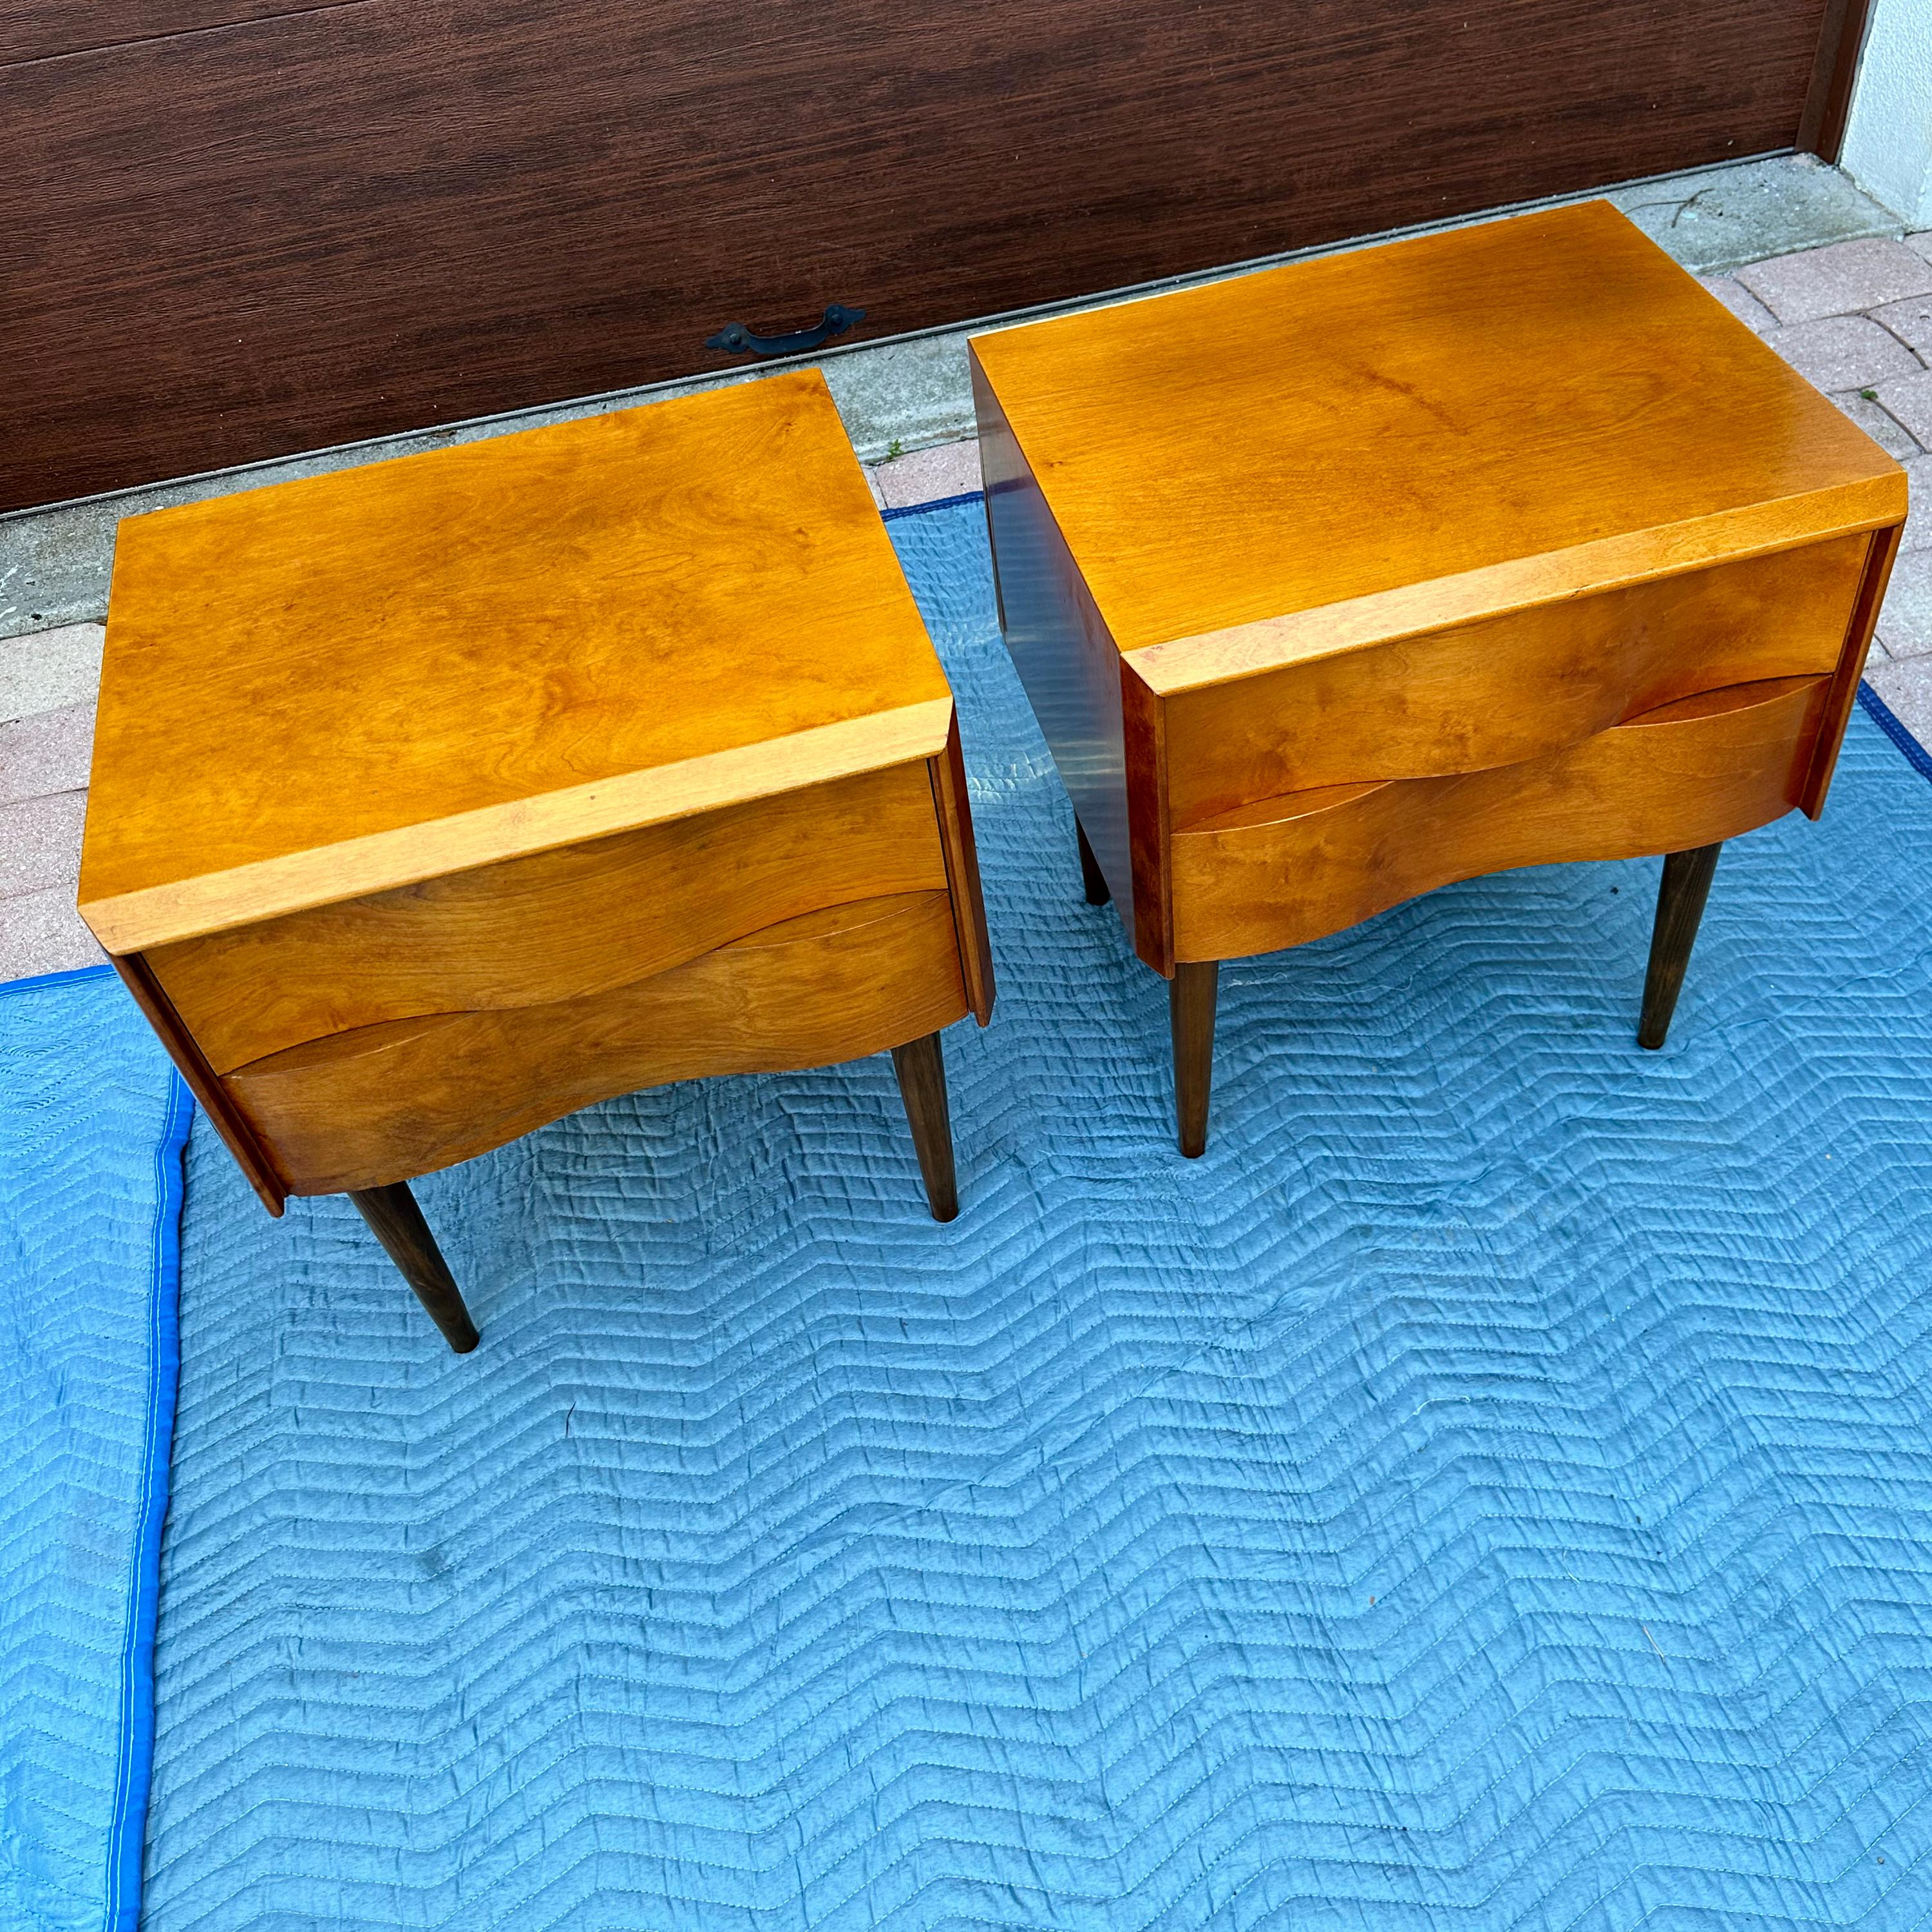 Mid Century Modern wavey front 2 drawer, pair of nightstands.  Gorgeous birch wood sculptural design atop 4 long dowel legs.  Designed by Edmond Spence and manufactured in Sweden. These would complement any style decor. 